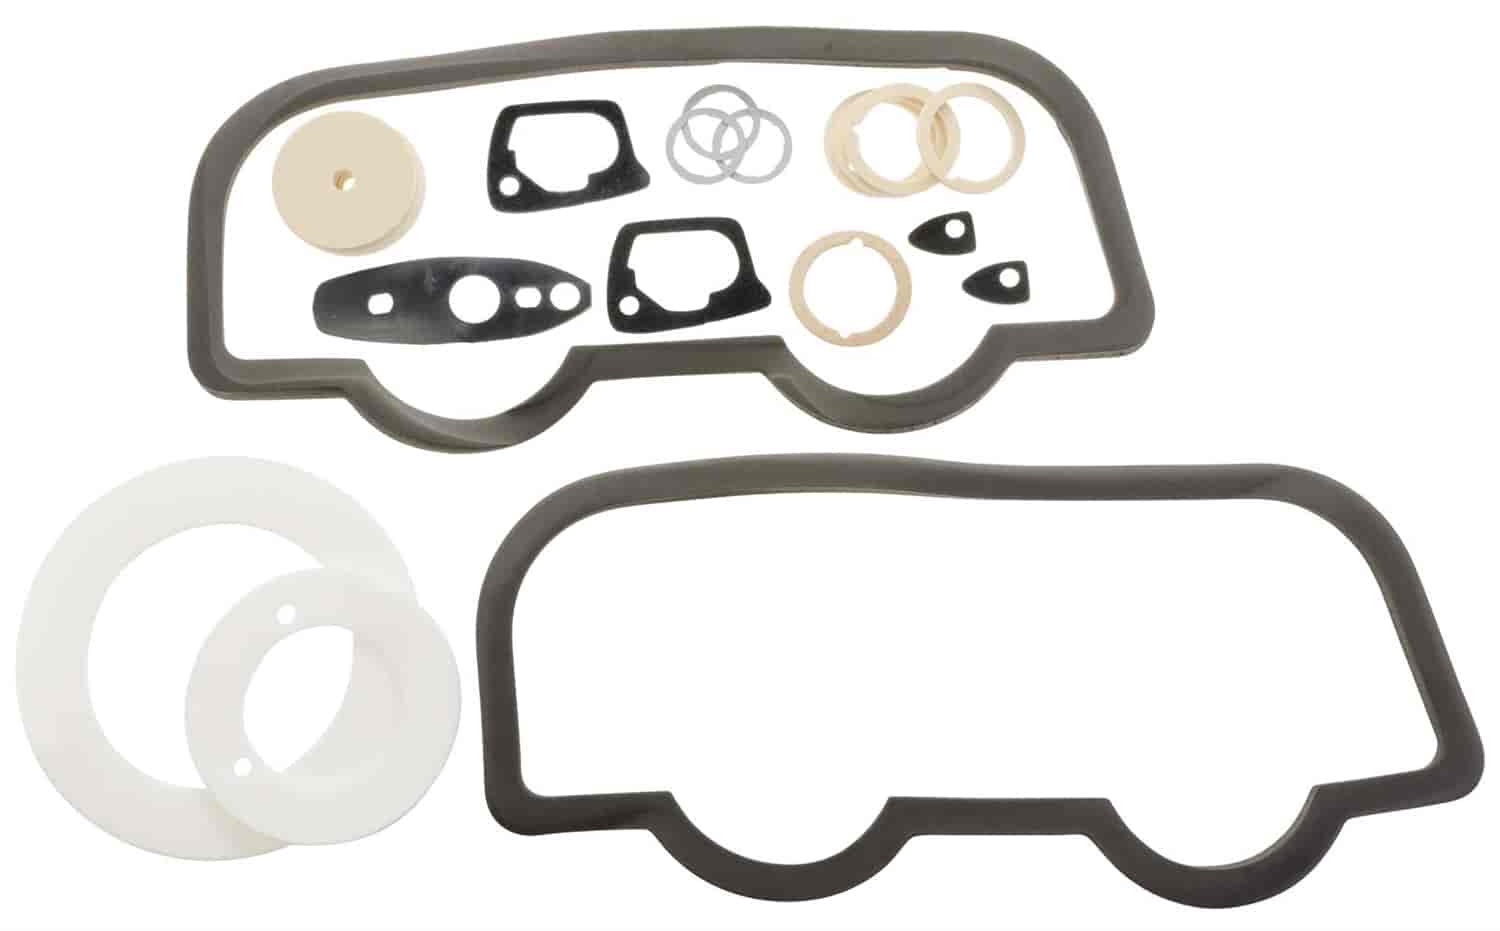 Paint gasket set 68 Charger